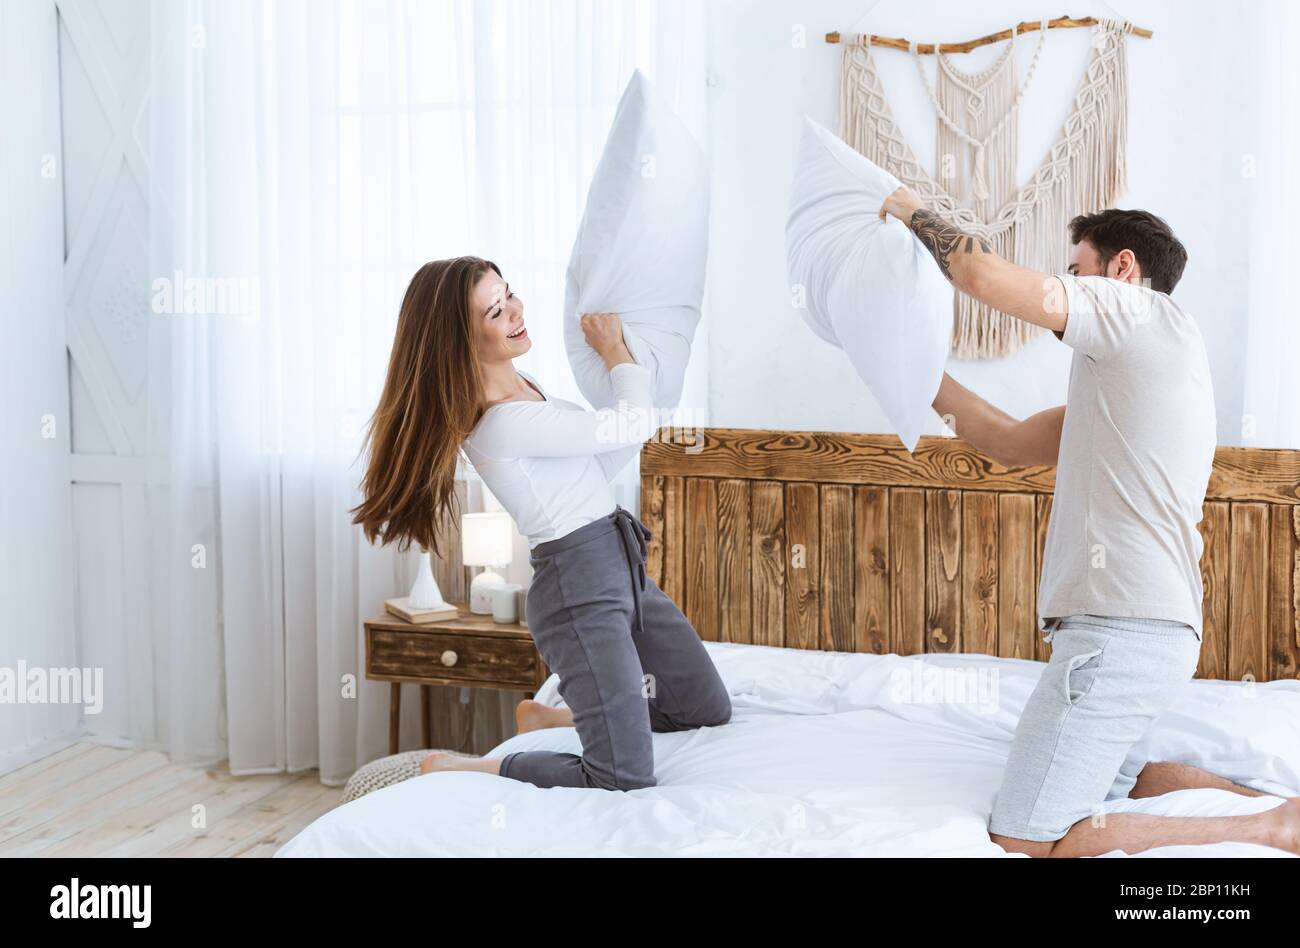 Young couple have fun in bedroom and fights pillows Stock Photo